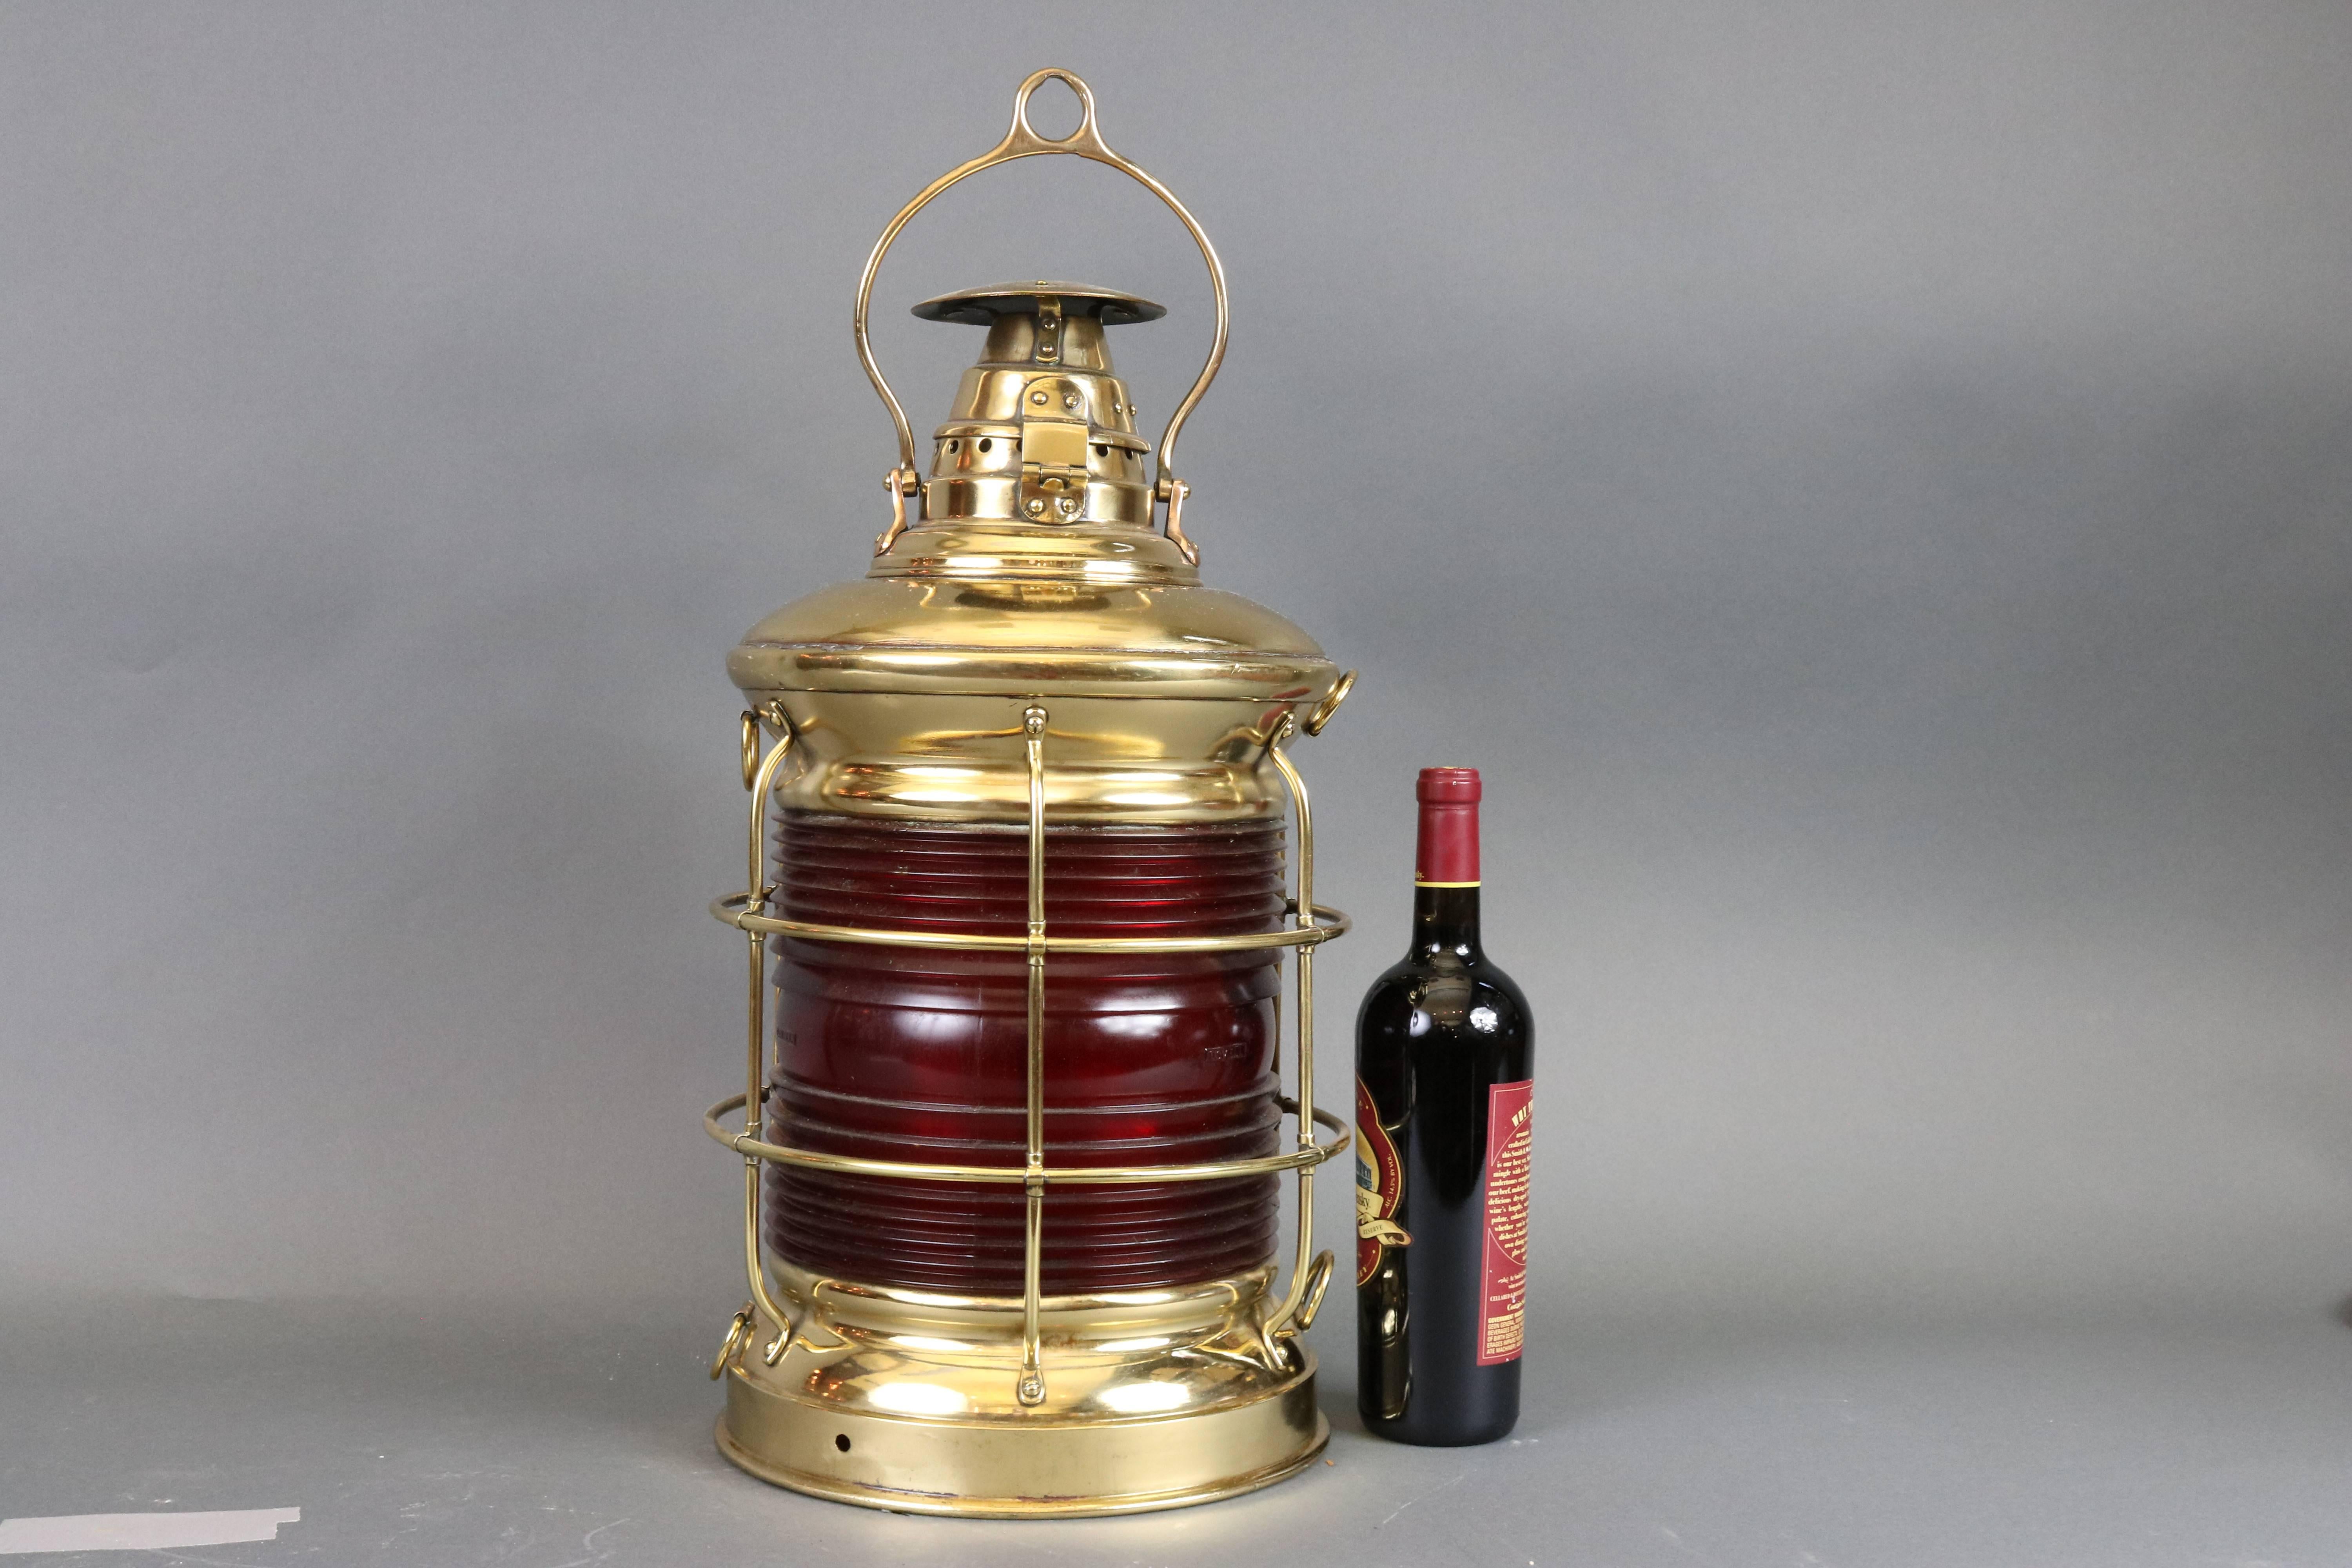 Quite large solid brass ship's lantern with warm patina. Red Fresnel lens, protective cage, tether rings. By Lovell. Very large monumental ship's light of museum quality. Dimensions: 11.5" diameter x 21" height (without handle).